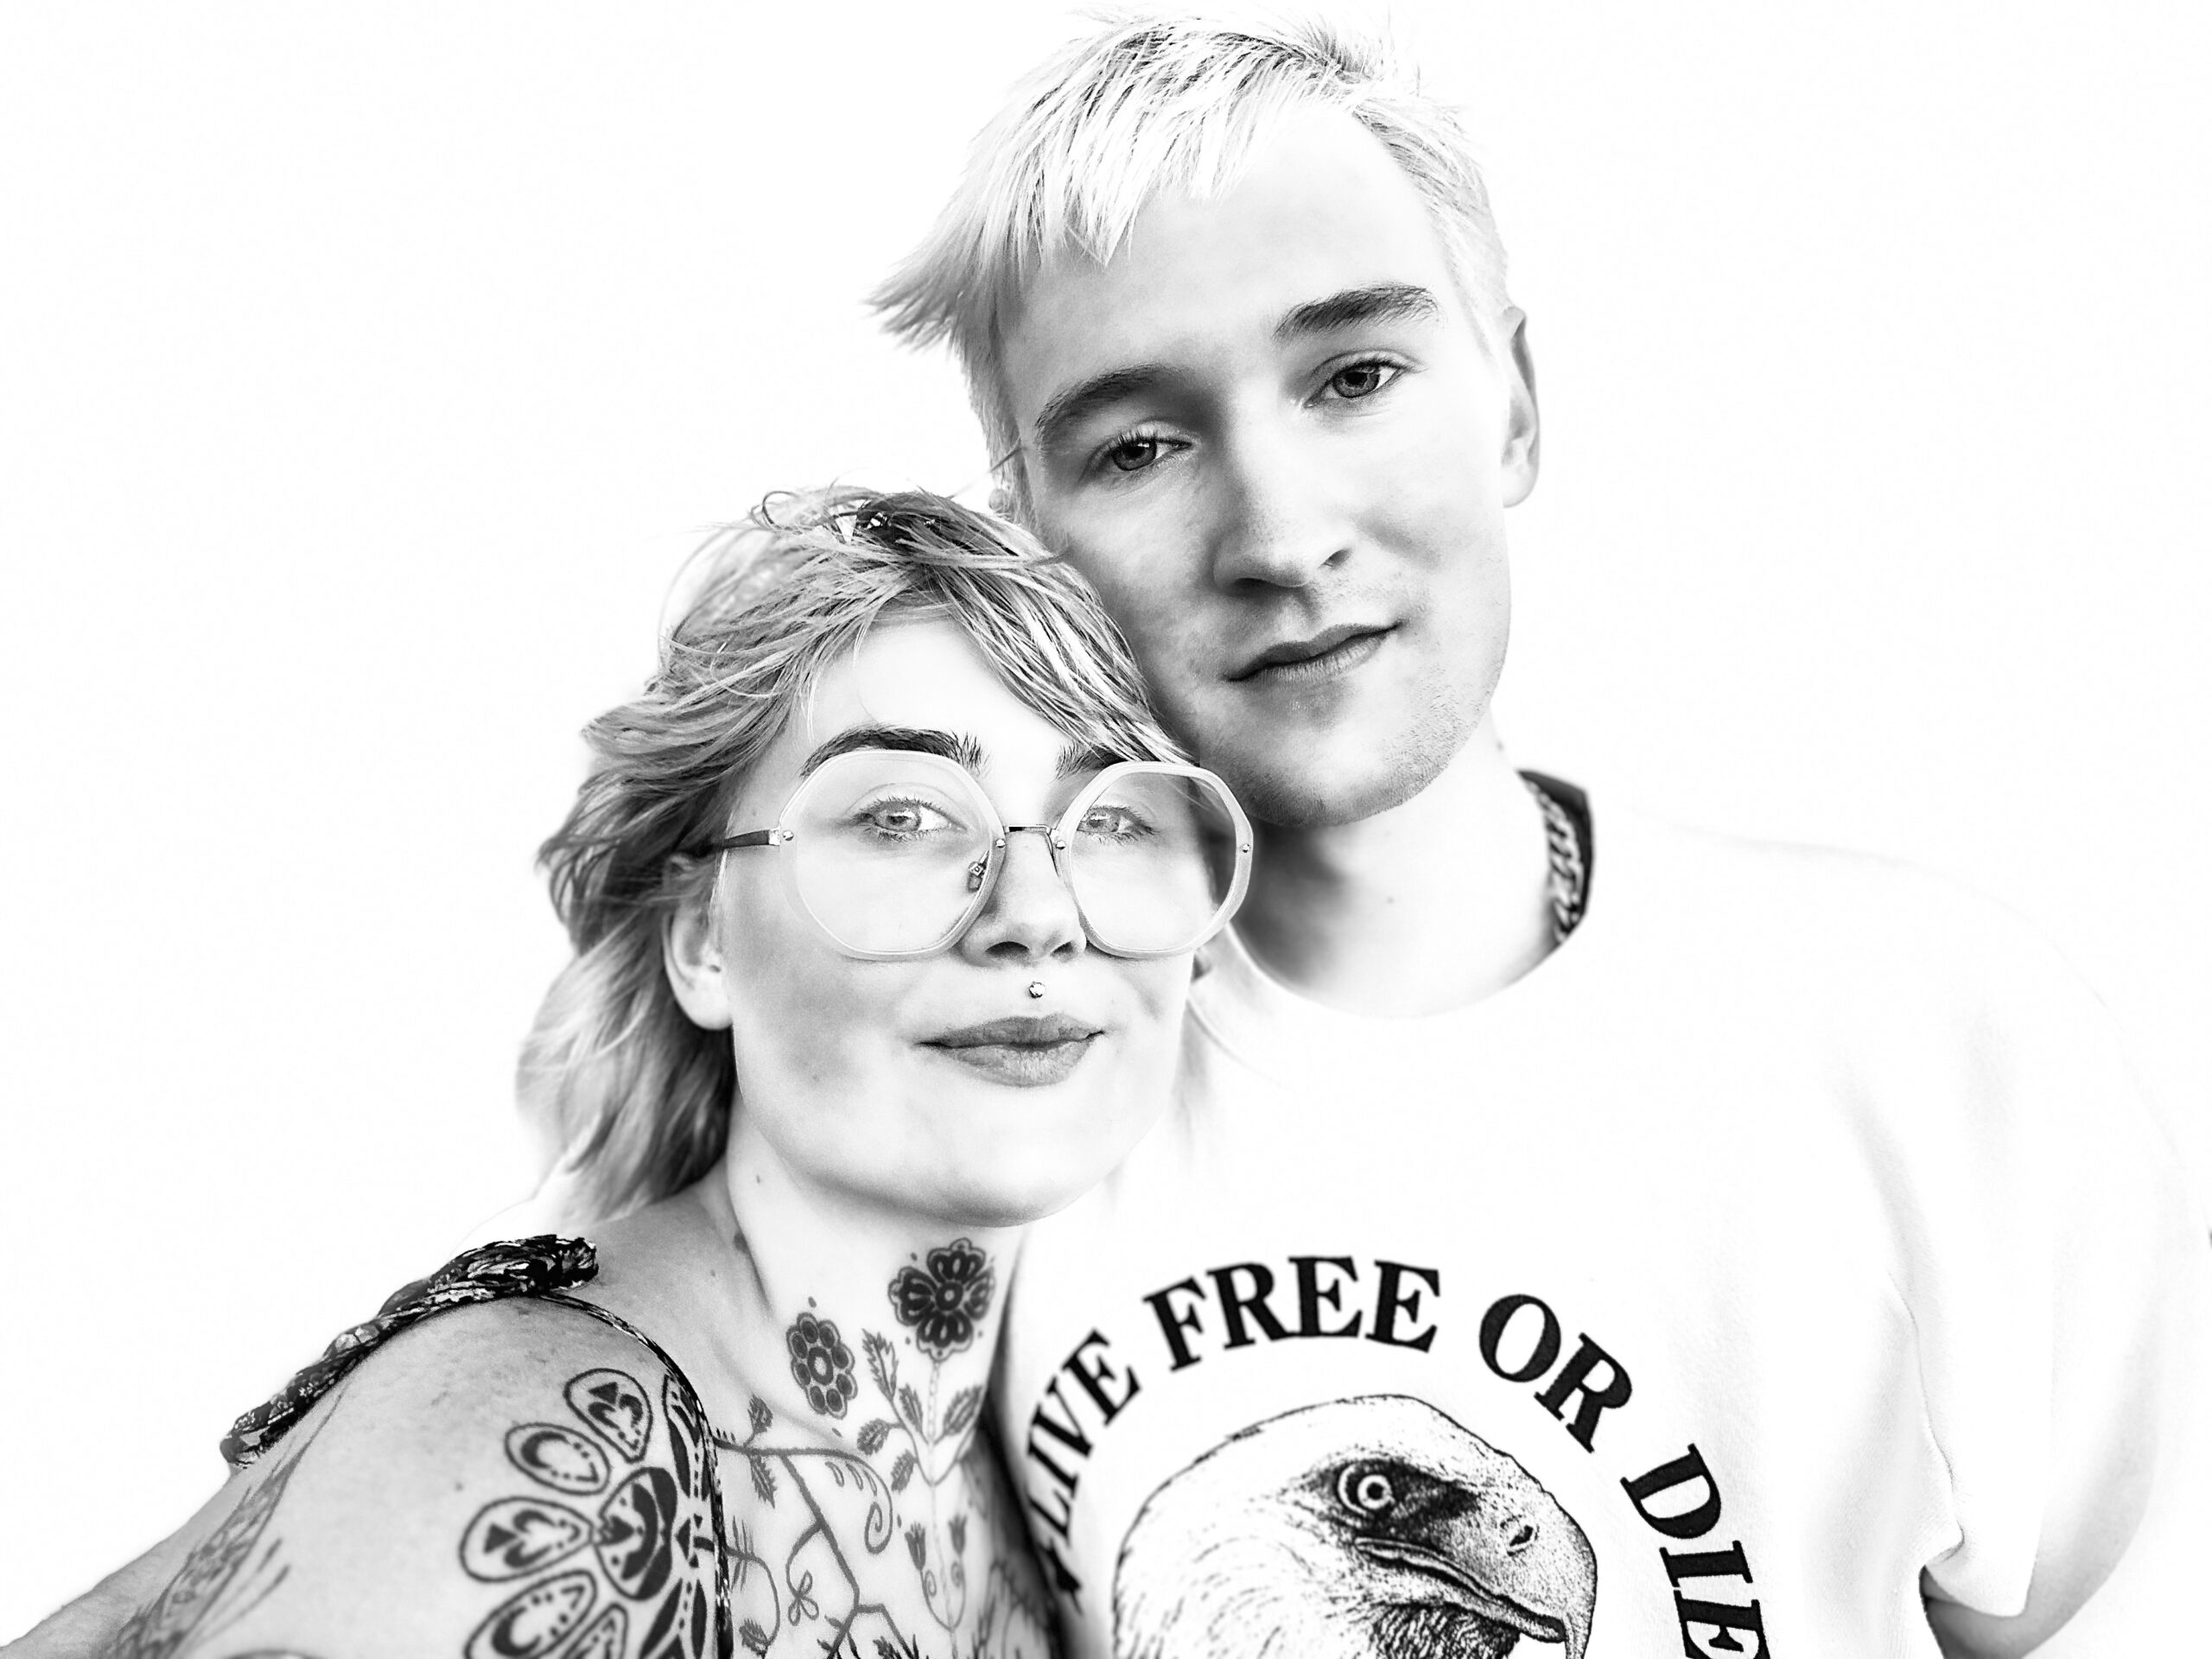 A black and white photo of a man and woman with tattoos.